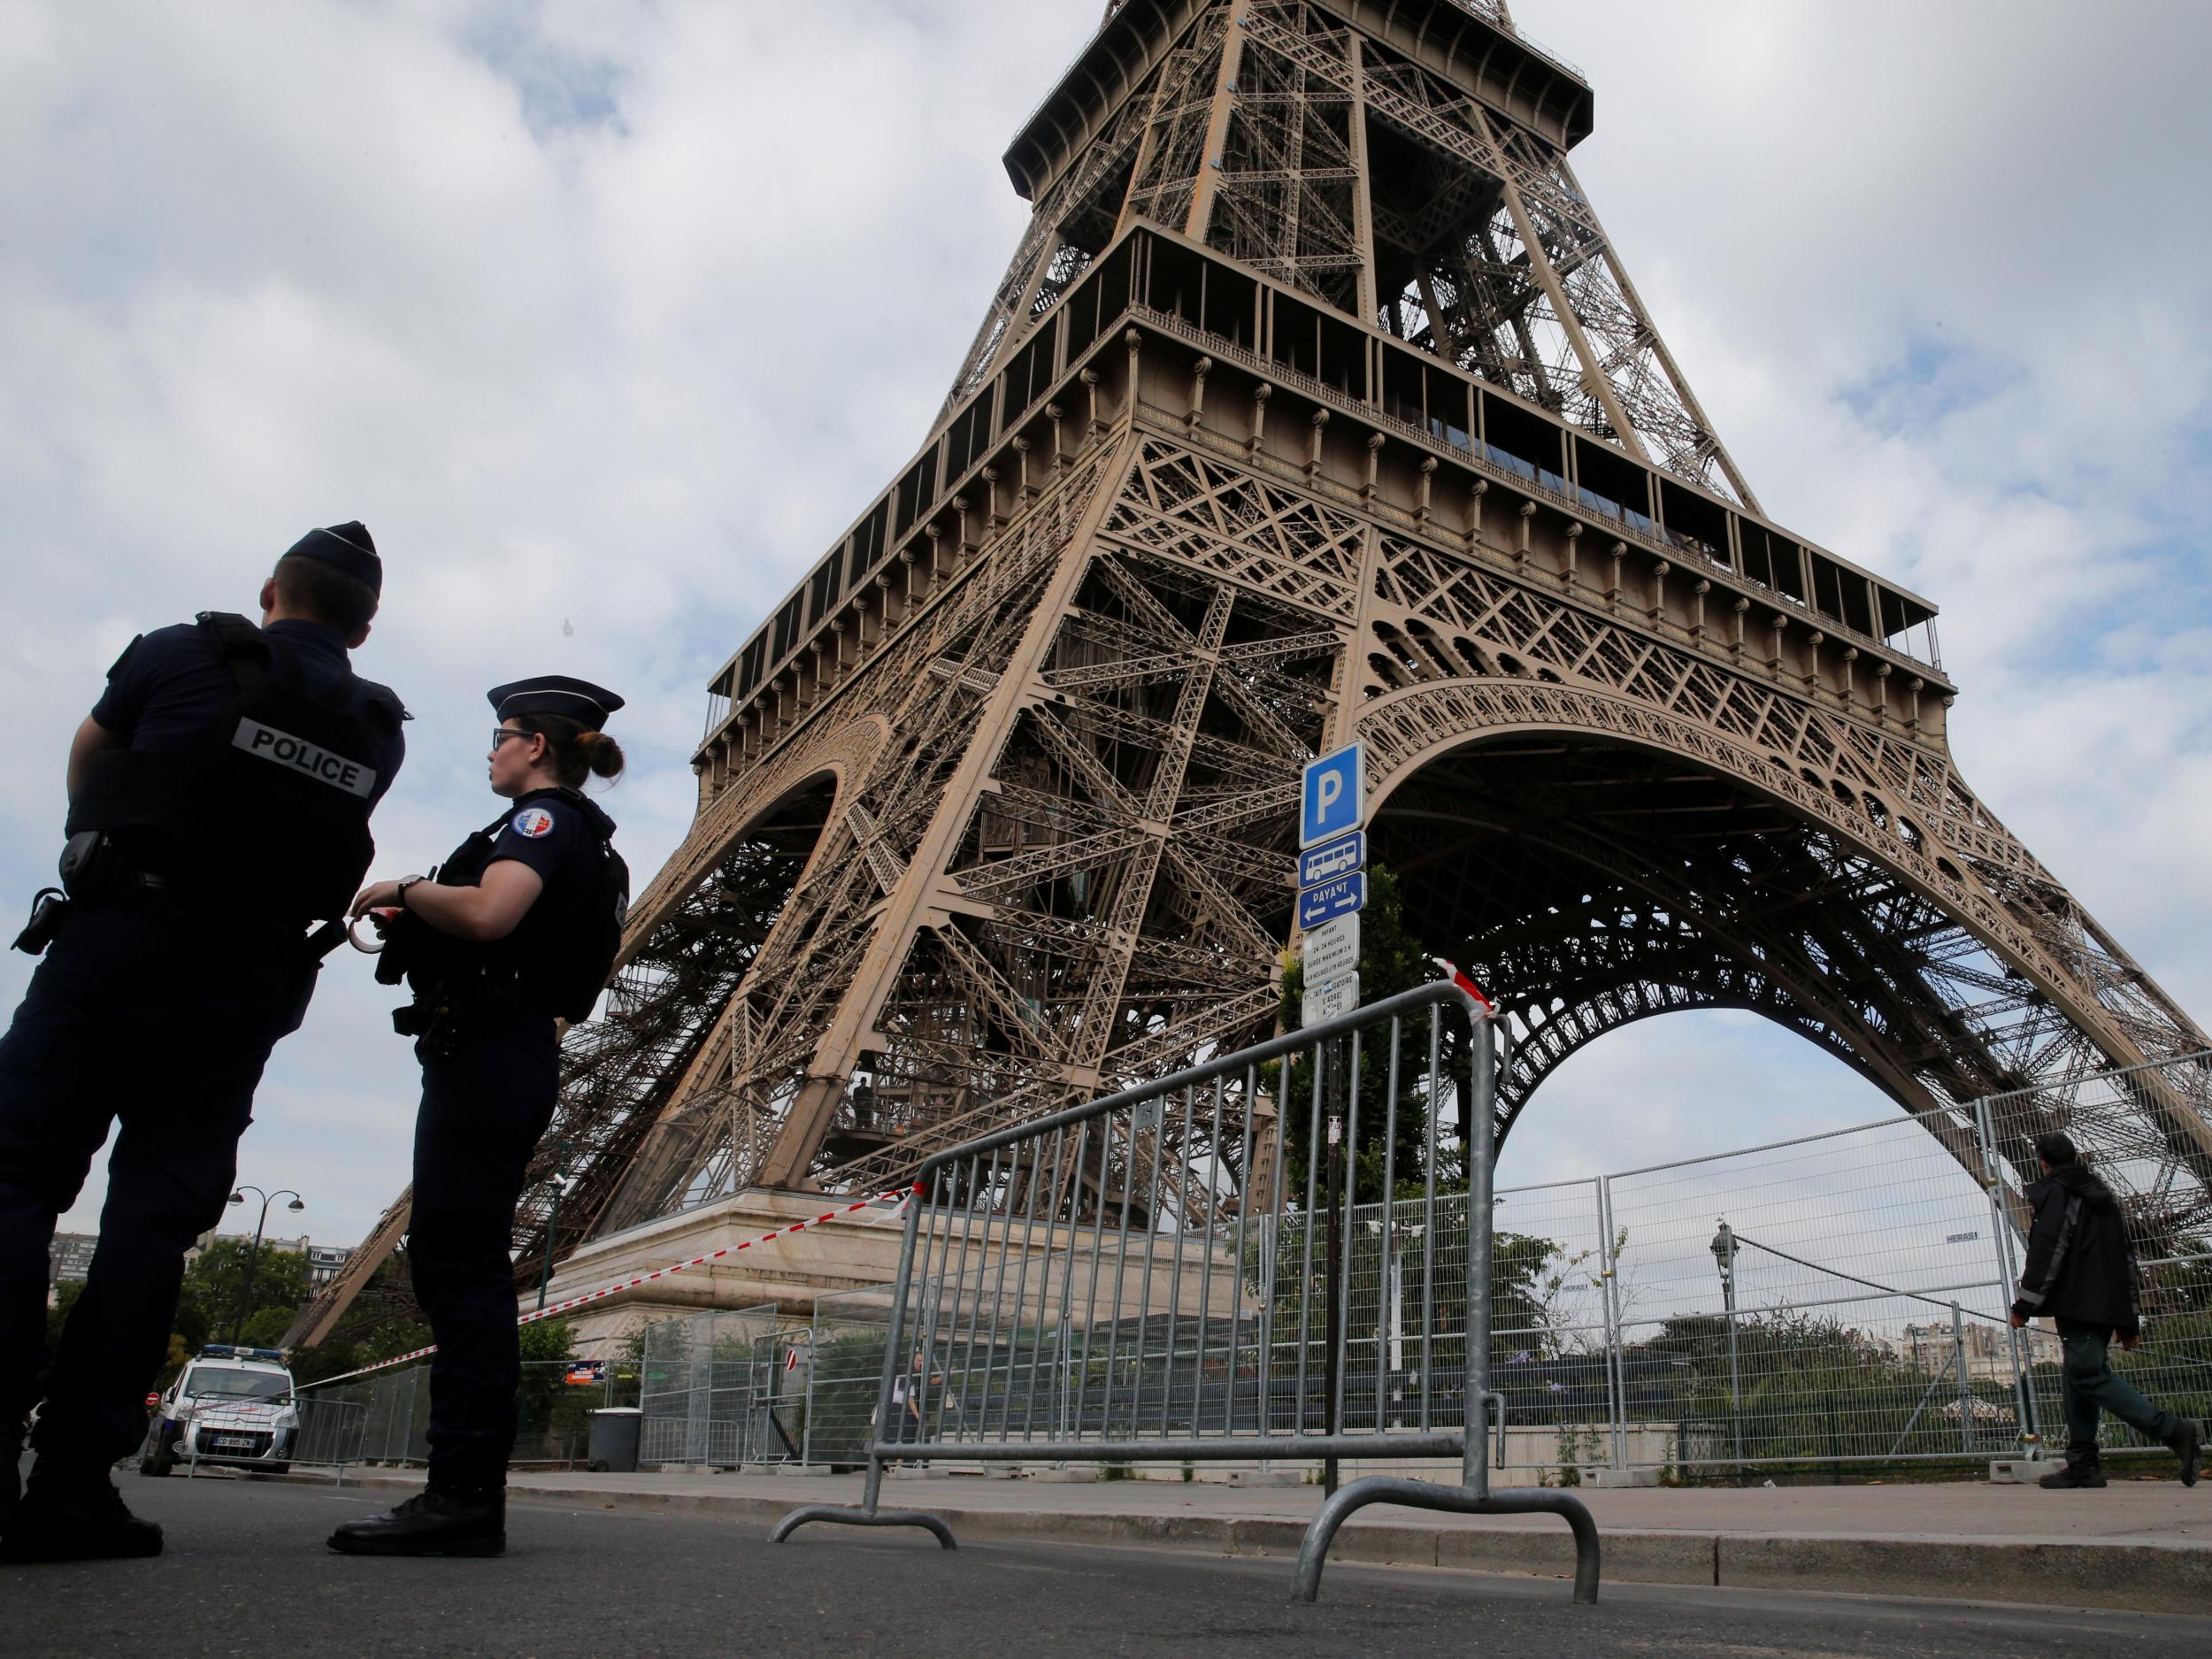 An investigation is underway by the Paris prosecutor's office